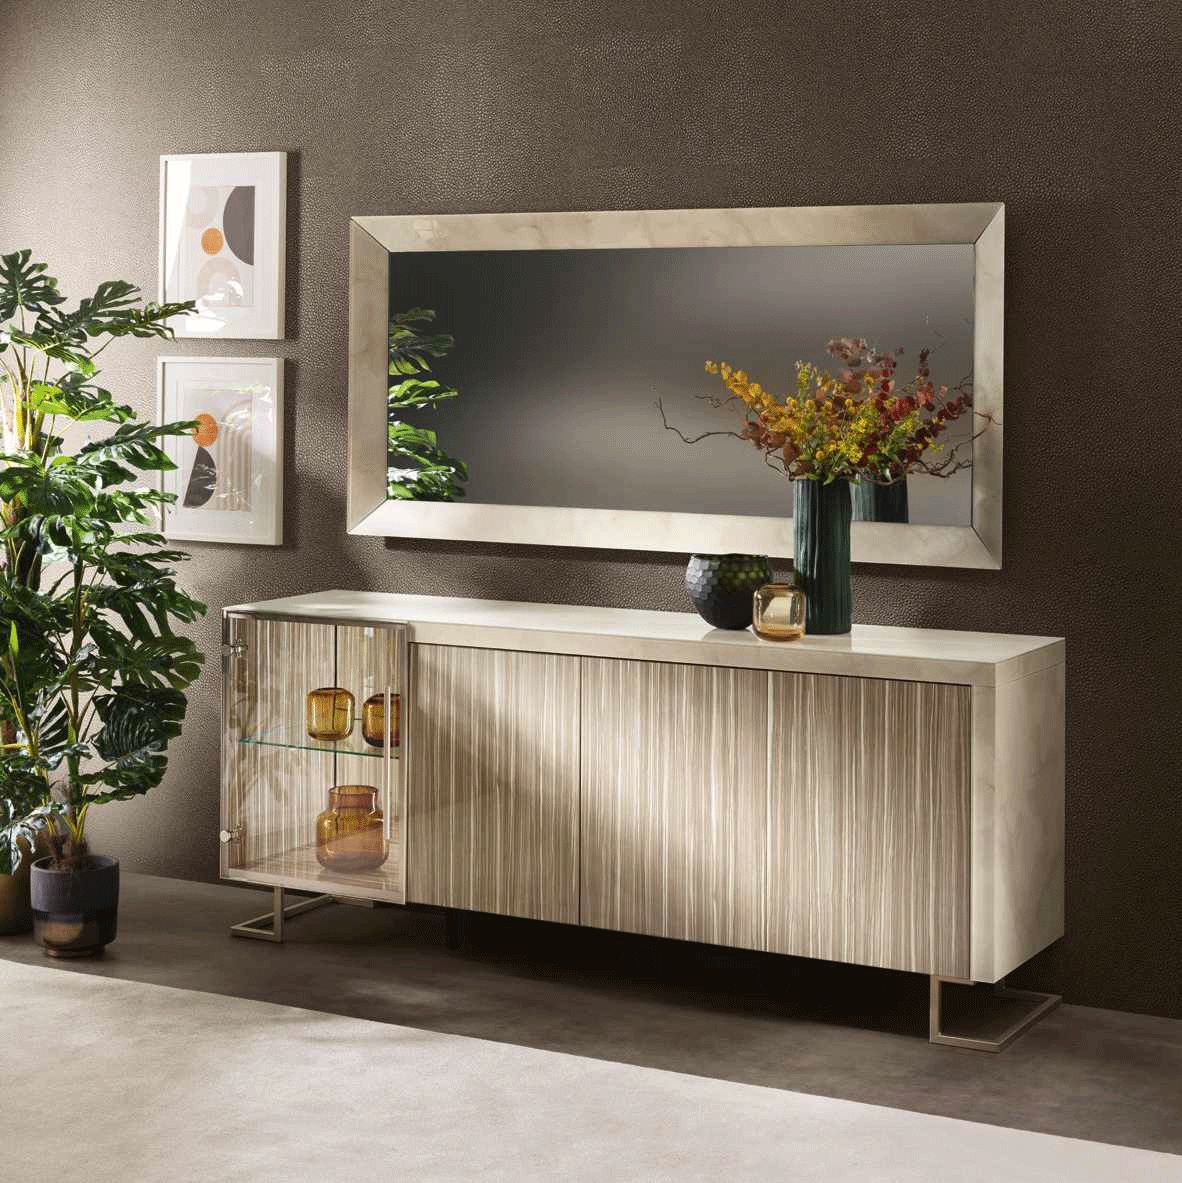 Brands Camel Classic Collection, Italy Luce 4 Door Buffet w/ Mirror